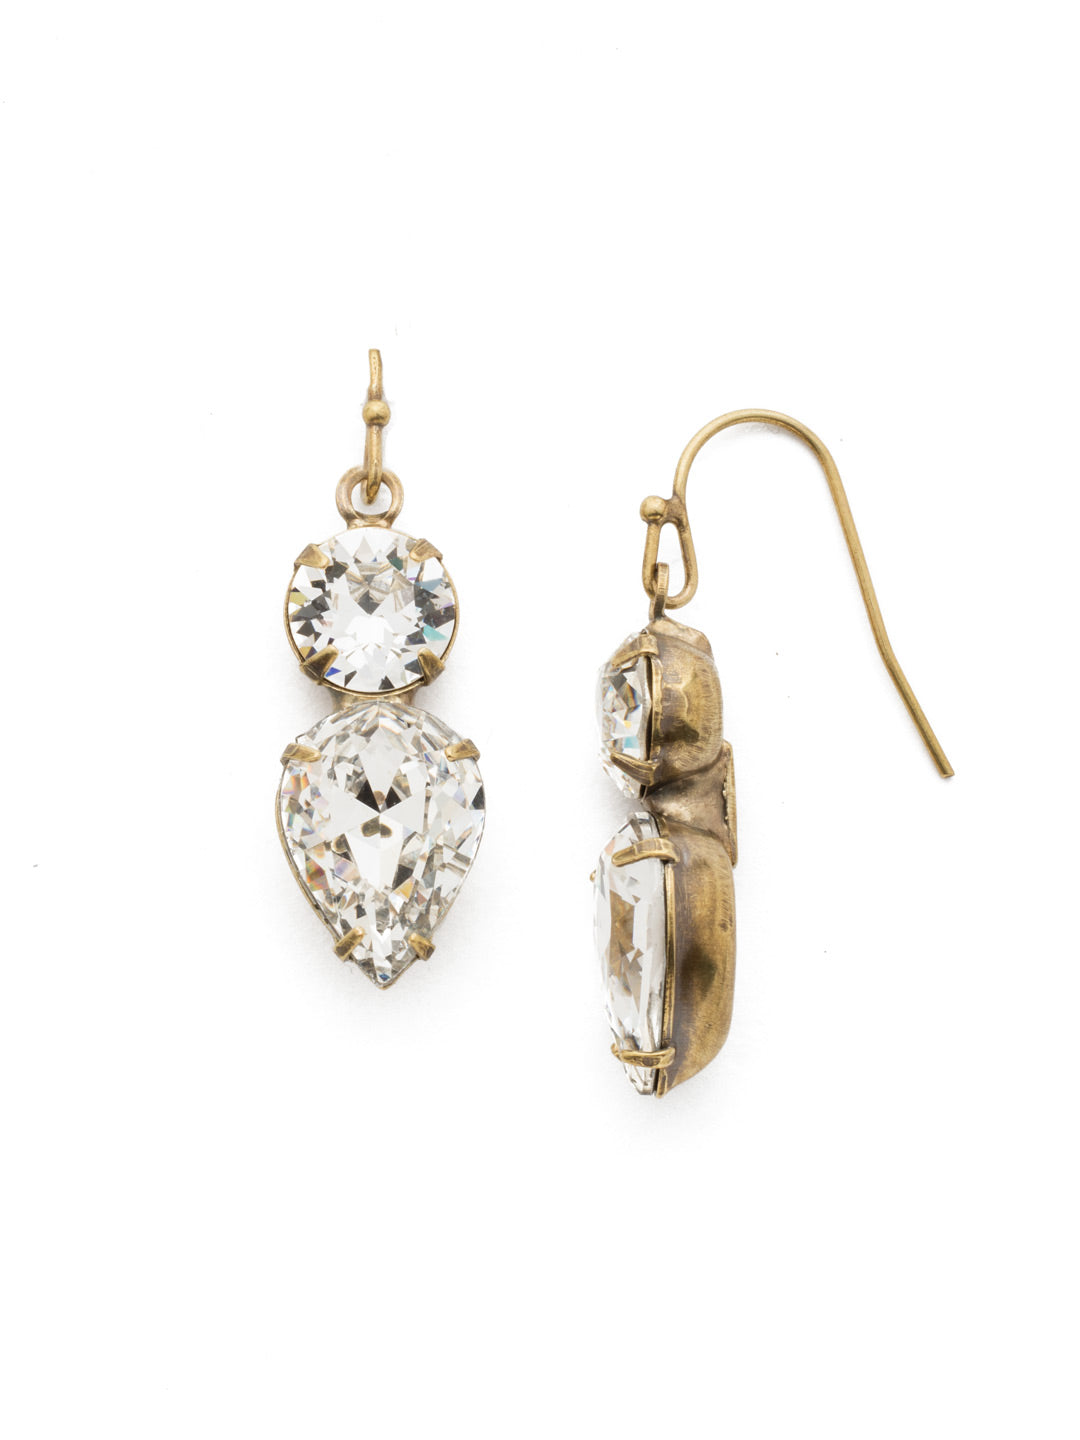 Brilliant Teardrop Dangle Earrings - EDH62AGCRY - <p>A brilliant teardrop crystal hanging from a round crystal post make these earrings perfect for any occasion From Sorrelli's Crystal collection in our Antique Gold-tone finish.</p>